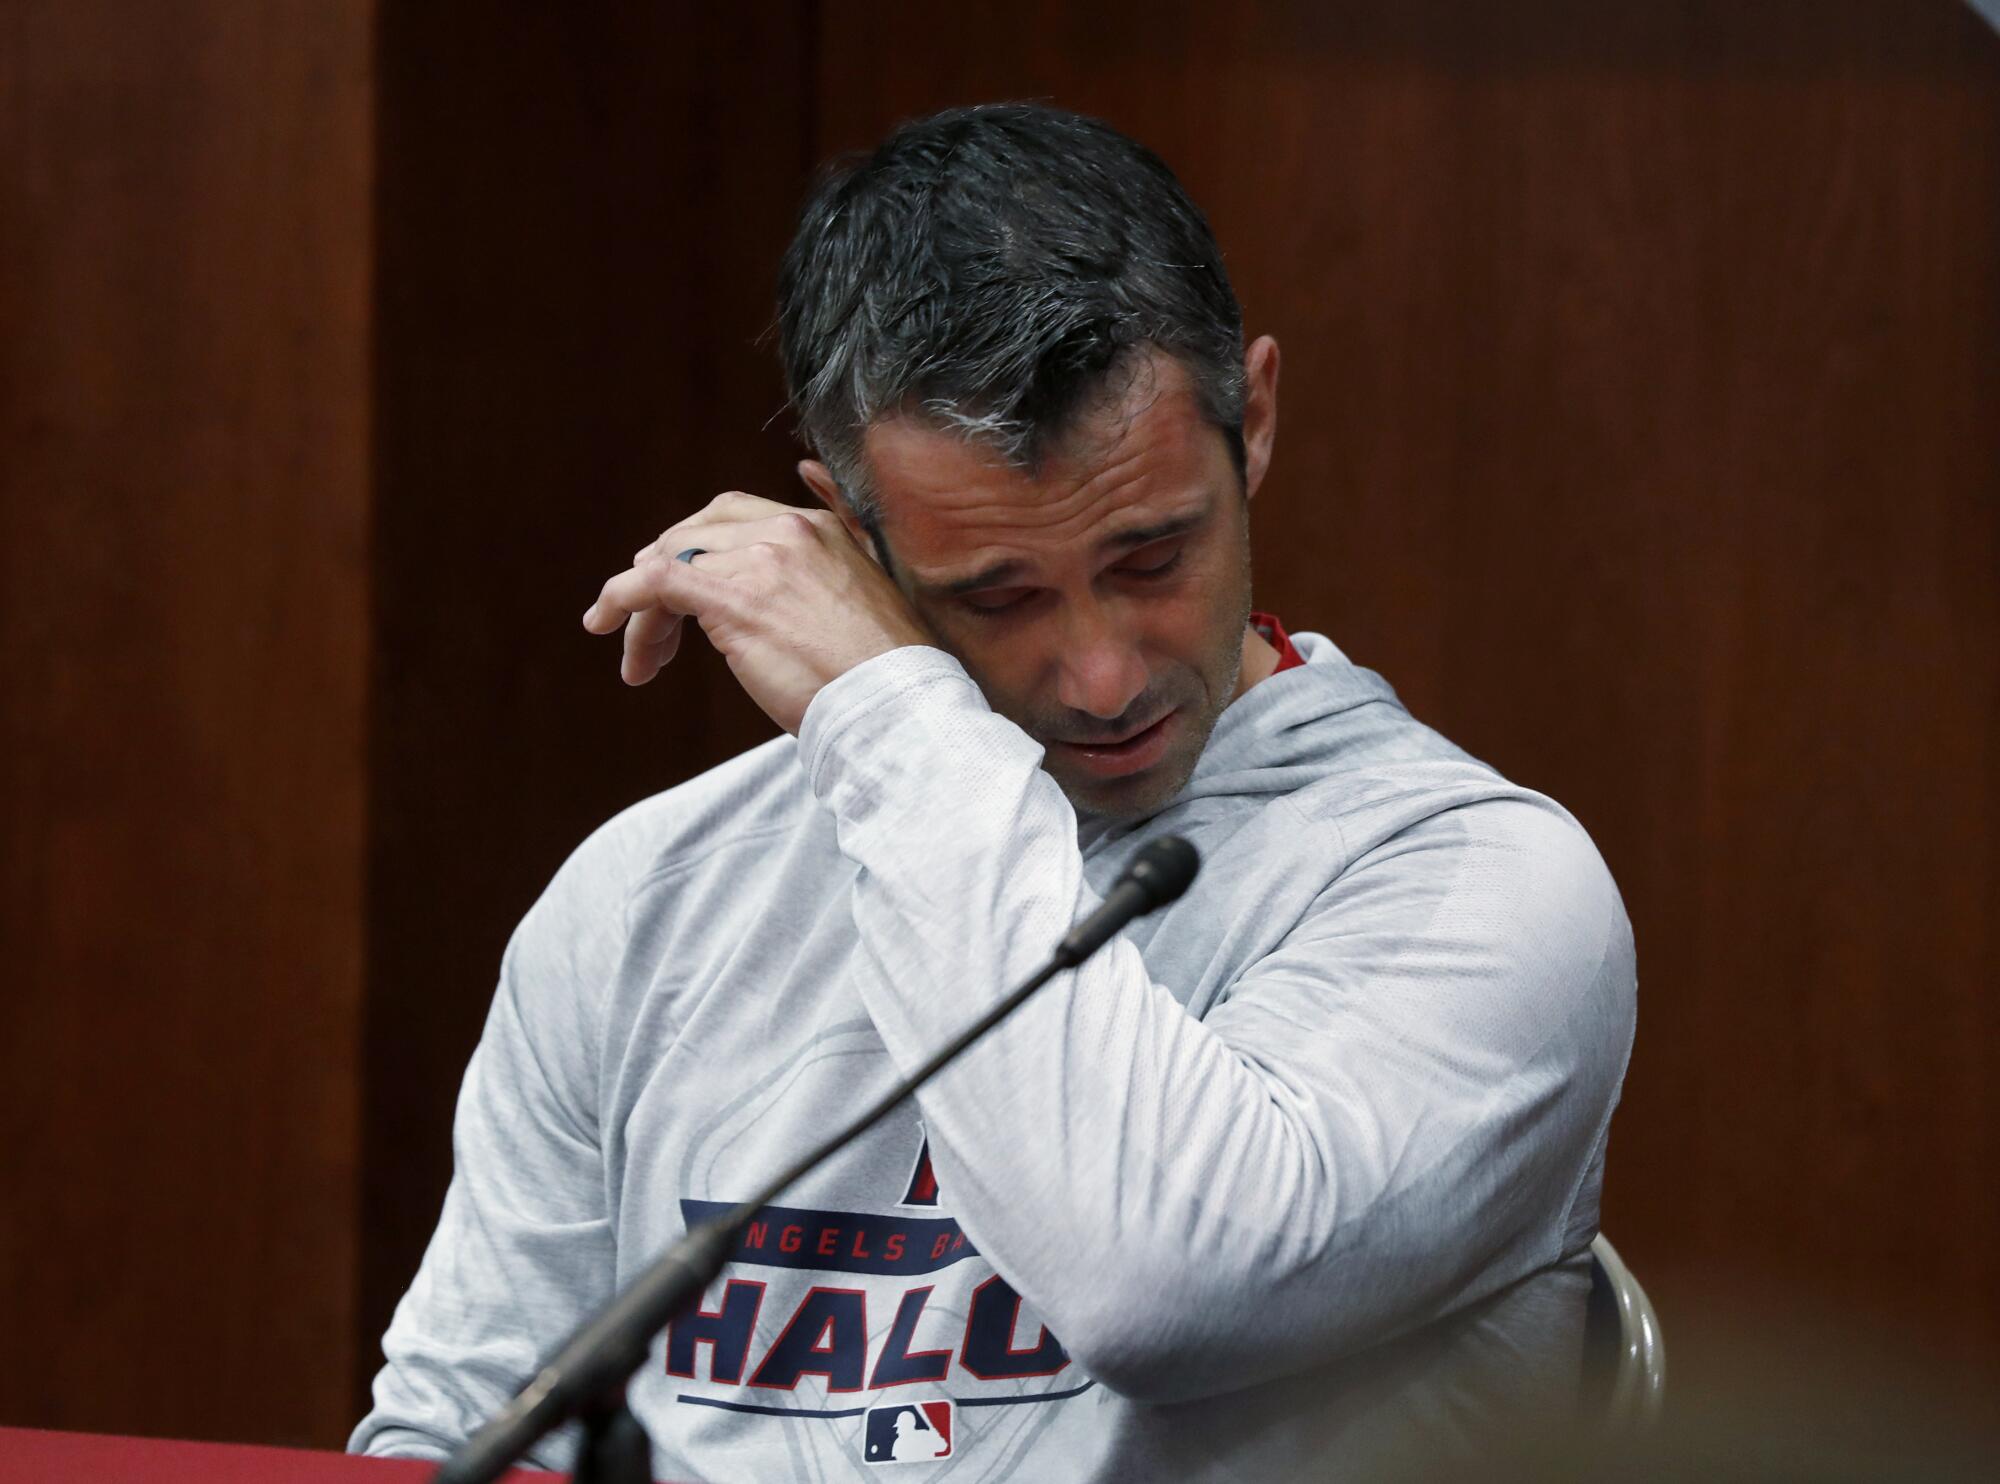 Angels manager Brad Ausmus wipes tears from his eyes while speaking near a microphone at a news conference